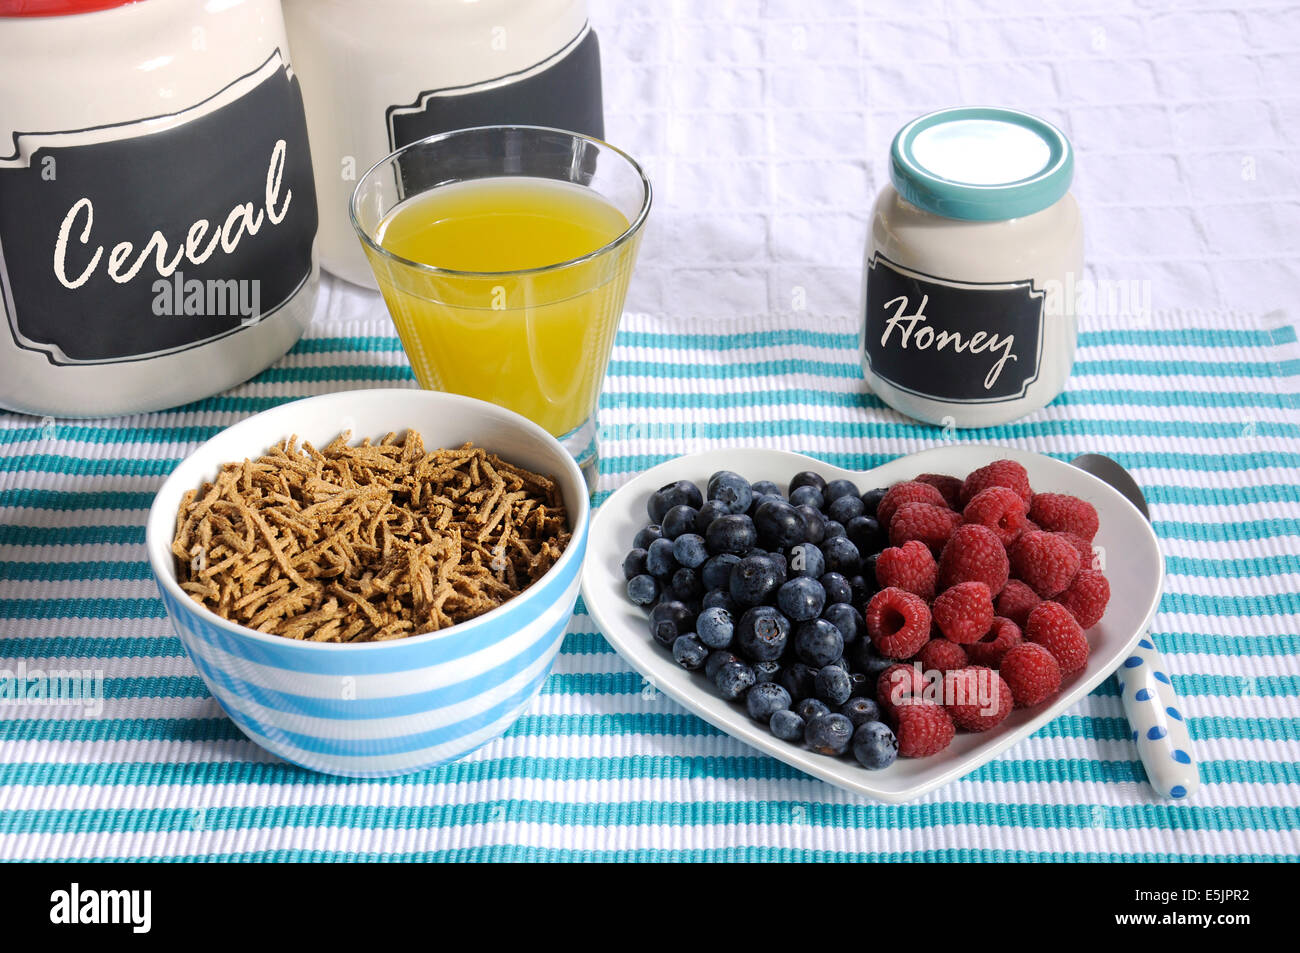 Healthy diet high dietary fiber breakfast with bowl of bran cereal and berries on white heart plate on aqua blue Stock Photo